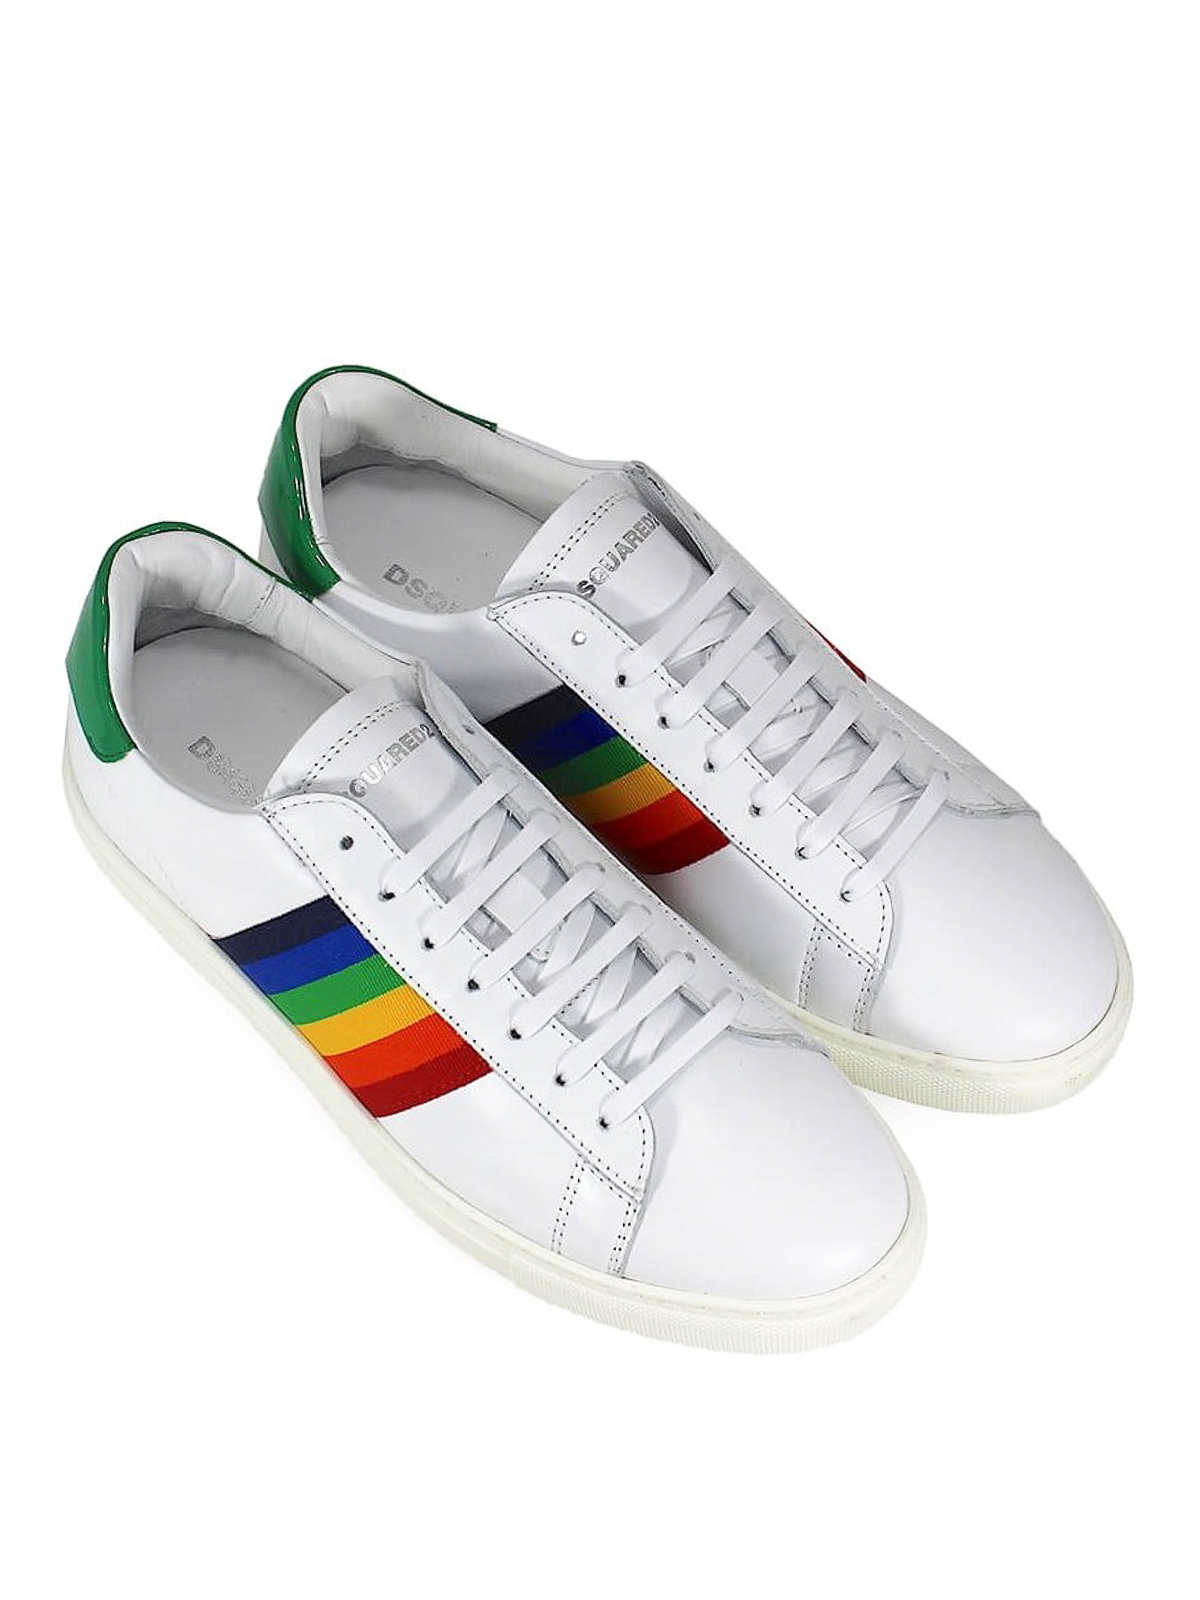 dsquared2 rainbow shoes